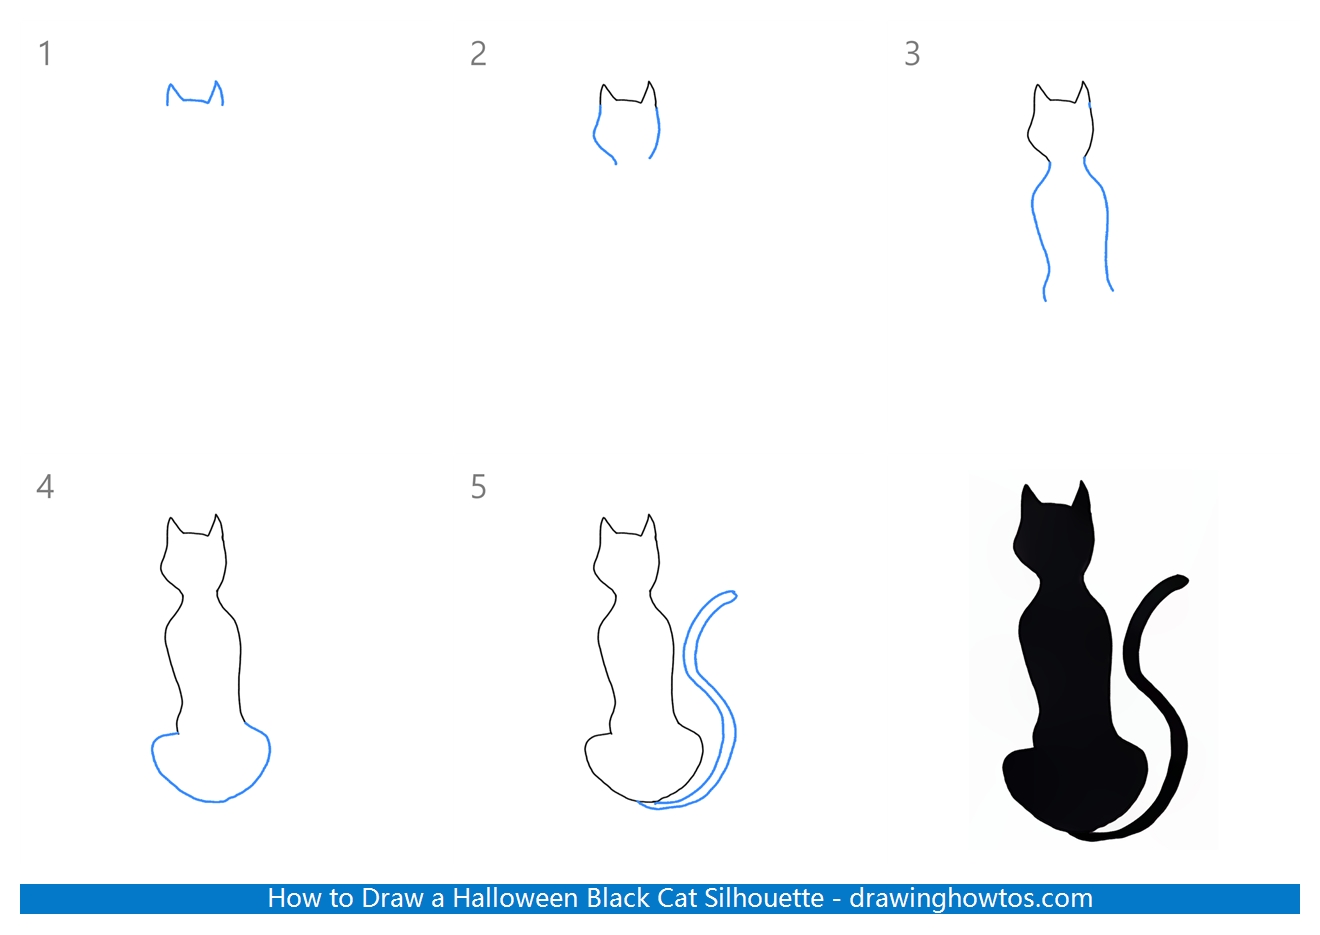 How to Draw a Halloween Black Cat Silhouette Step by Step